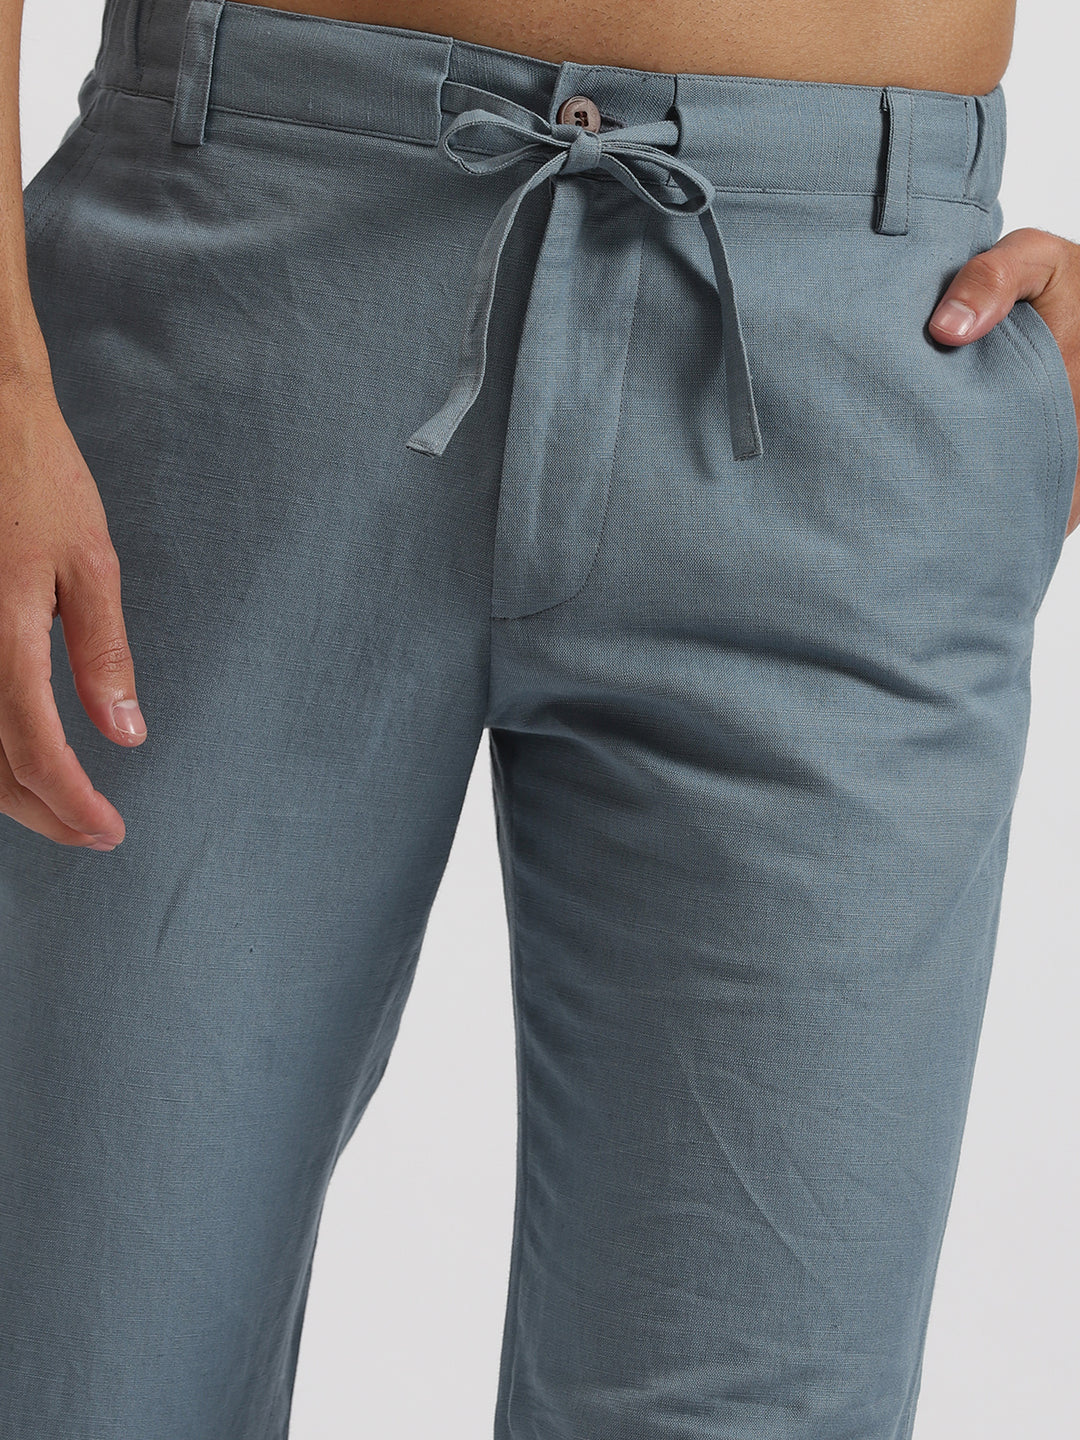 Theo - Linen Travel Pants - Teal Blue